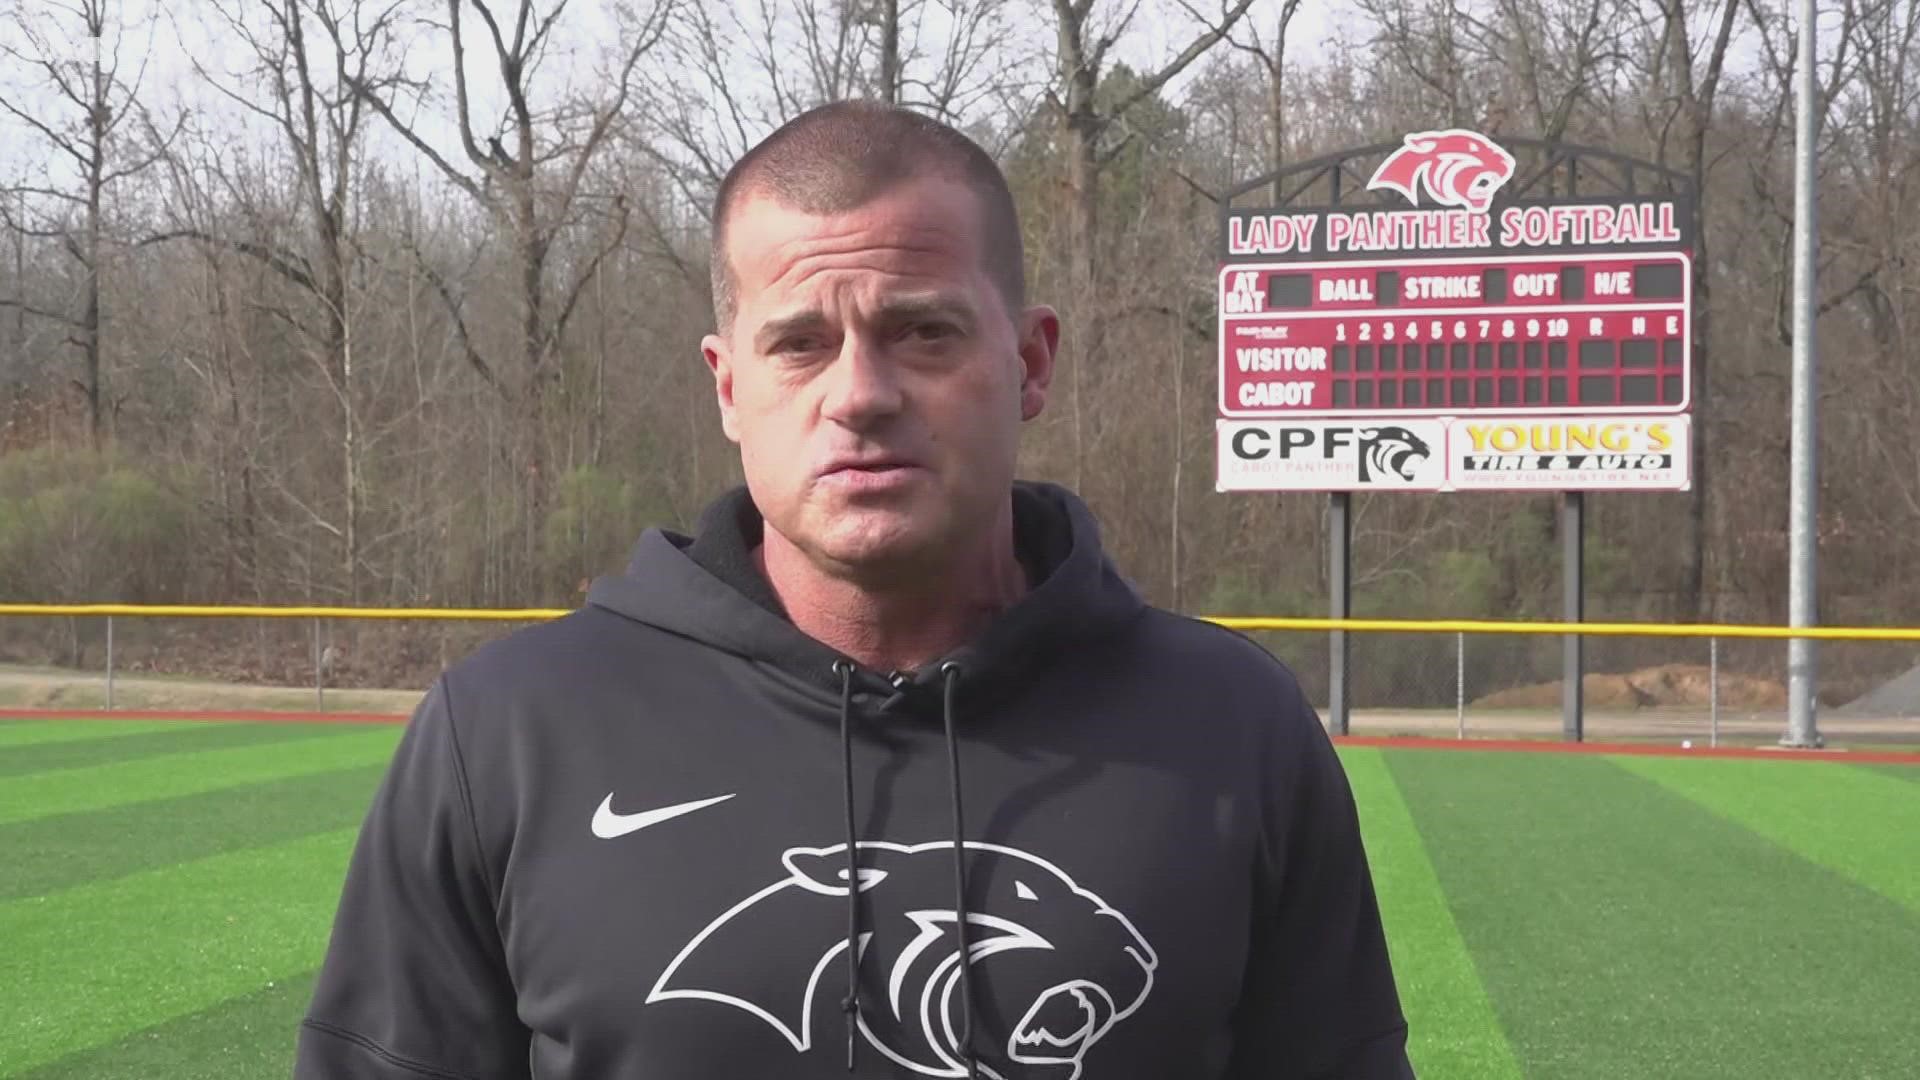 Coach Chris Cope is the Arkansan of the Day for April 26th, 2022.